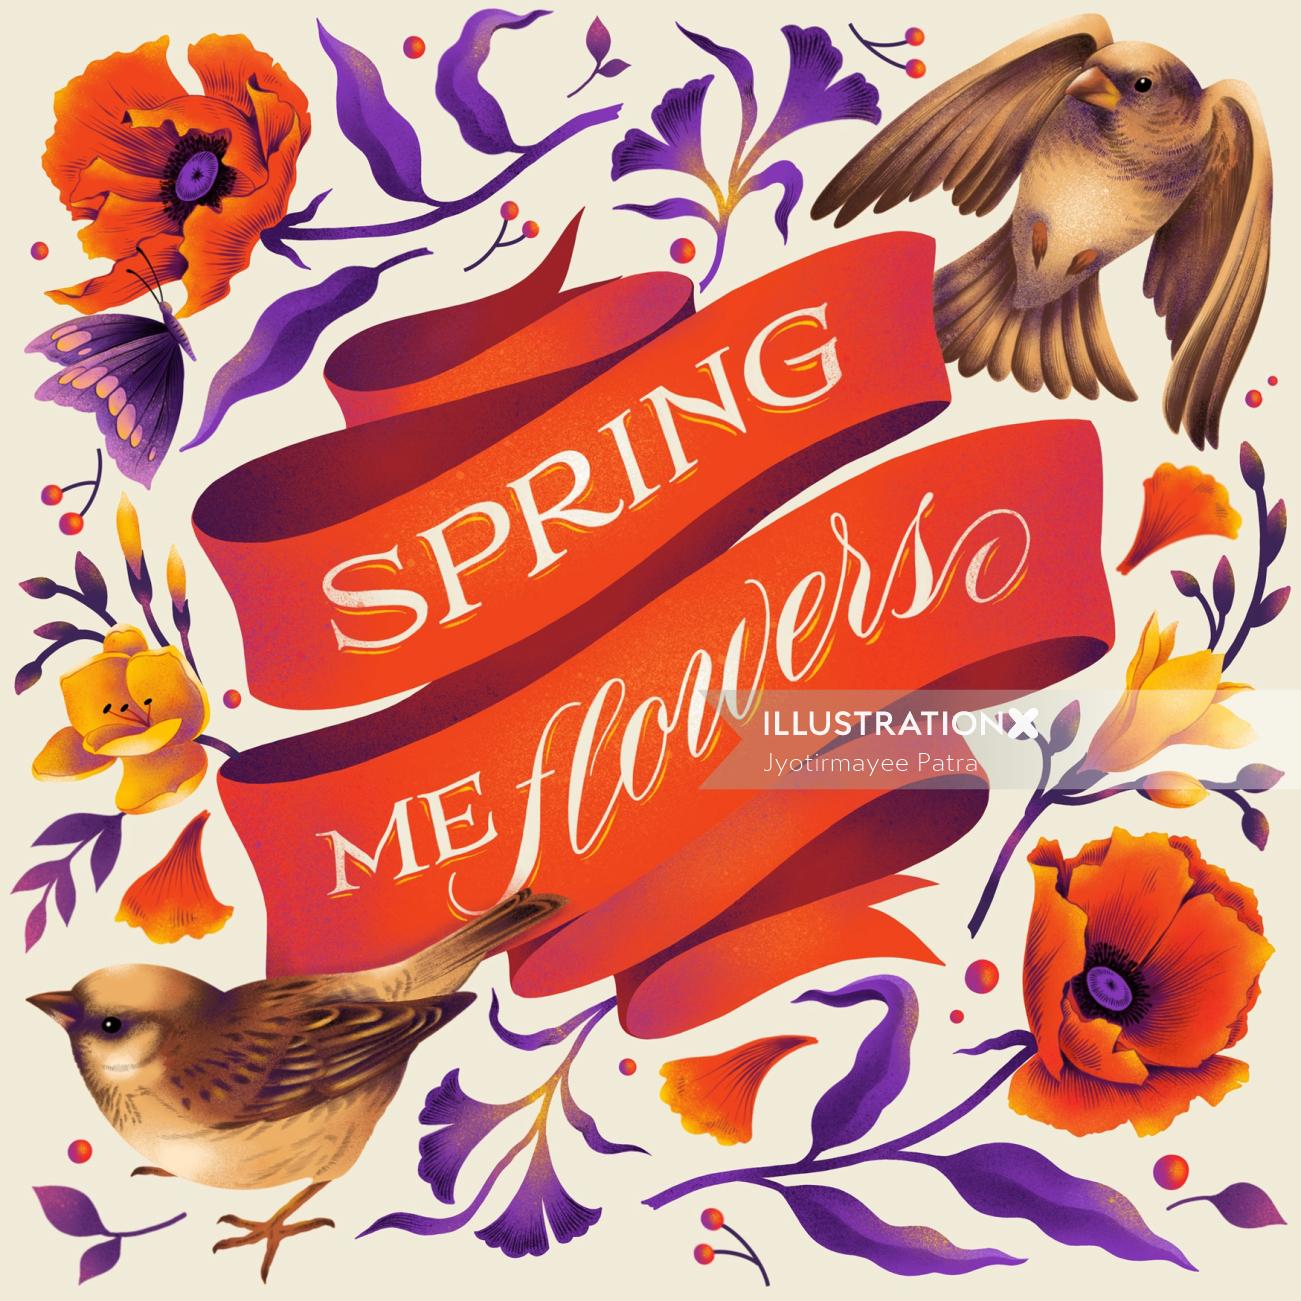 Artwork inspired by the season of Spring title Spring me flowers